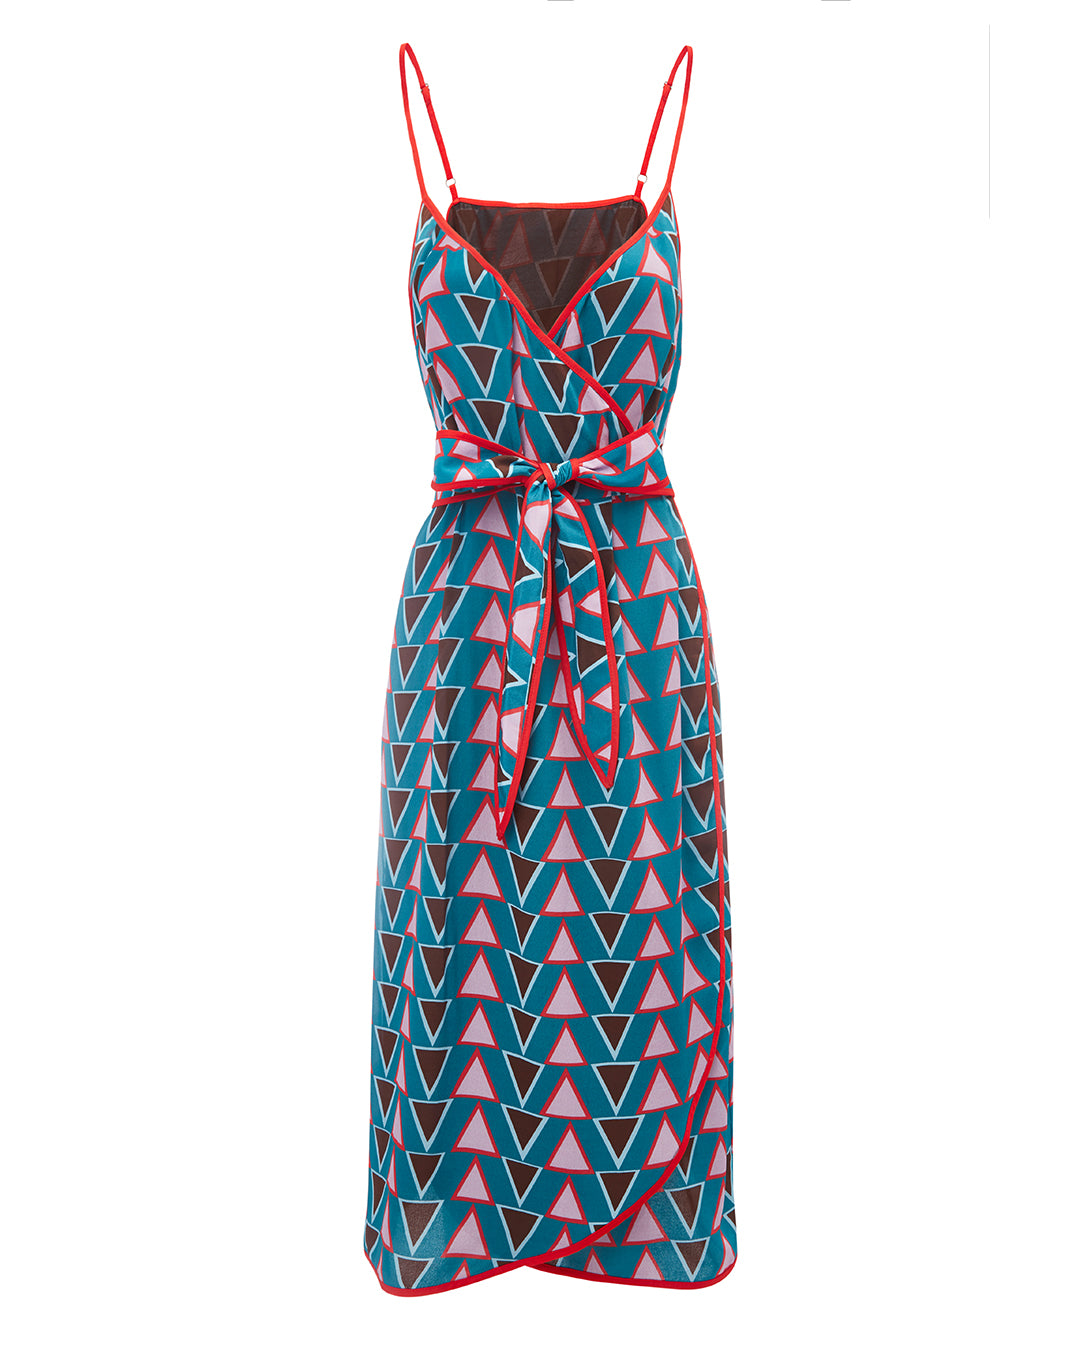 Stacked Triangles Spaghetti Wrap Dress | cukimber designs